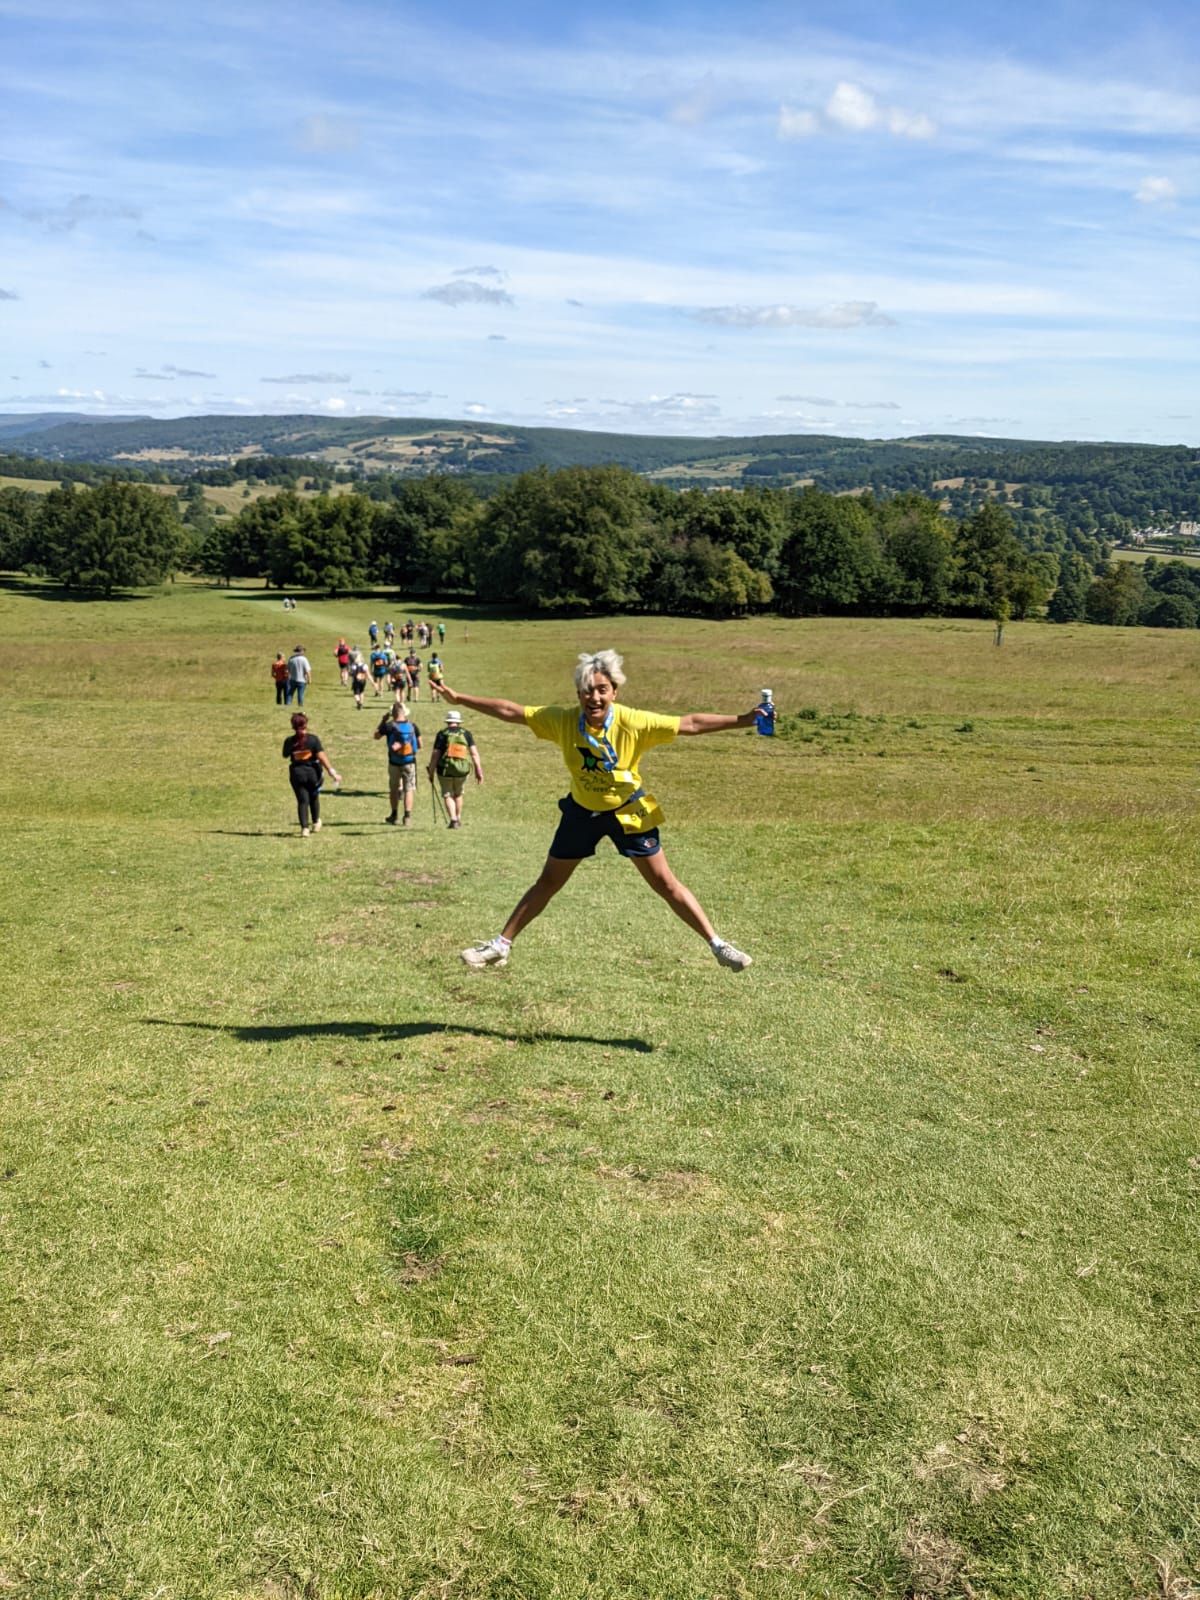 A woman leaping in the air against a backdrop of fields